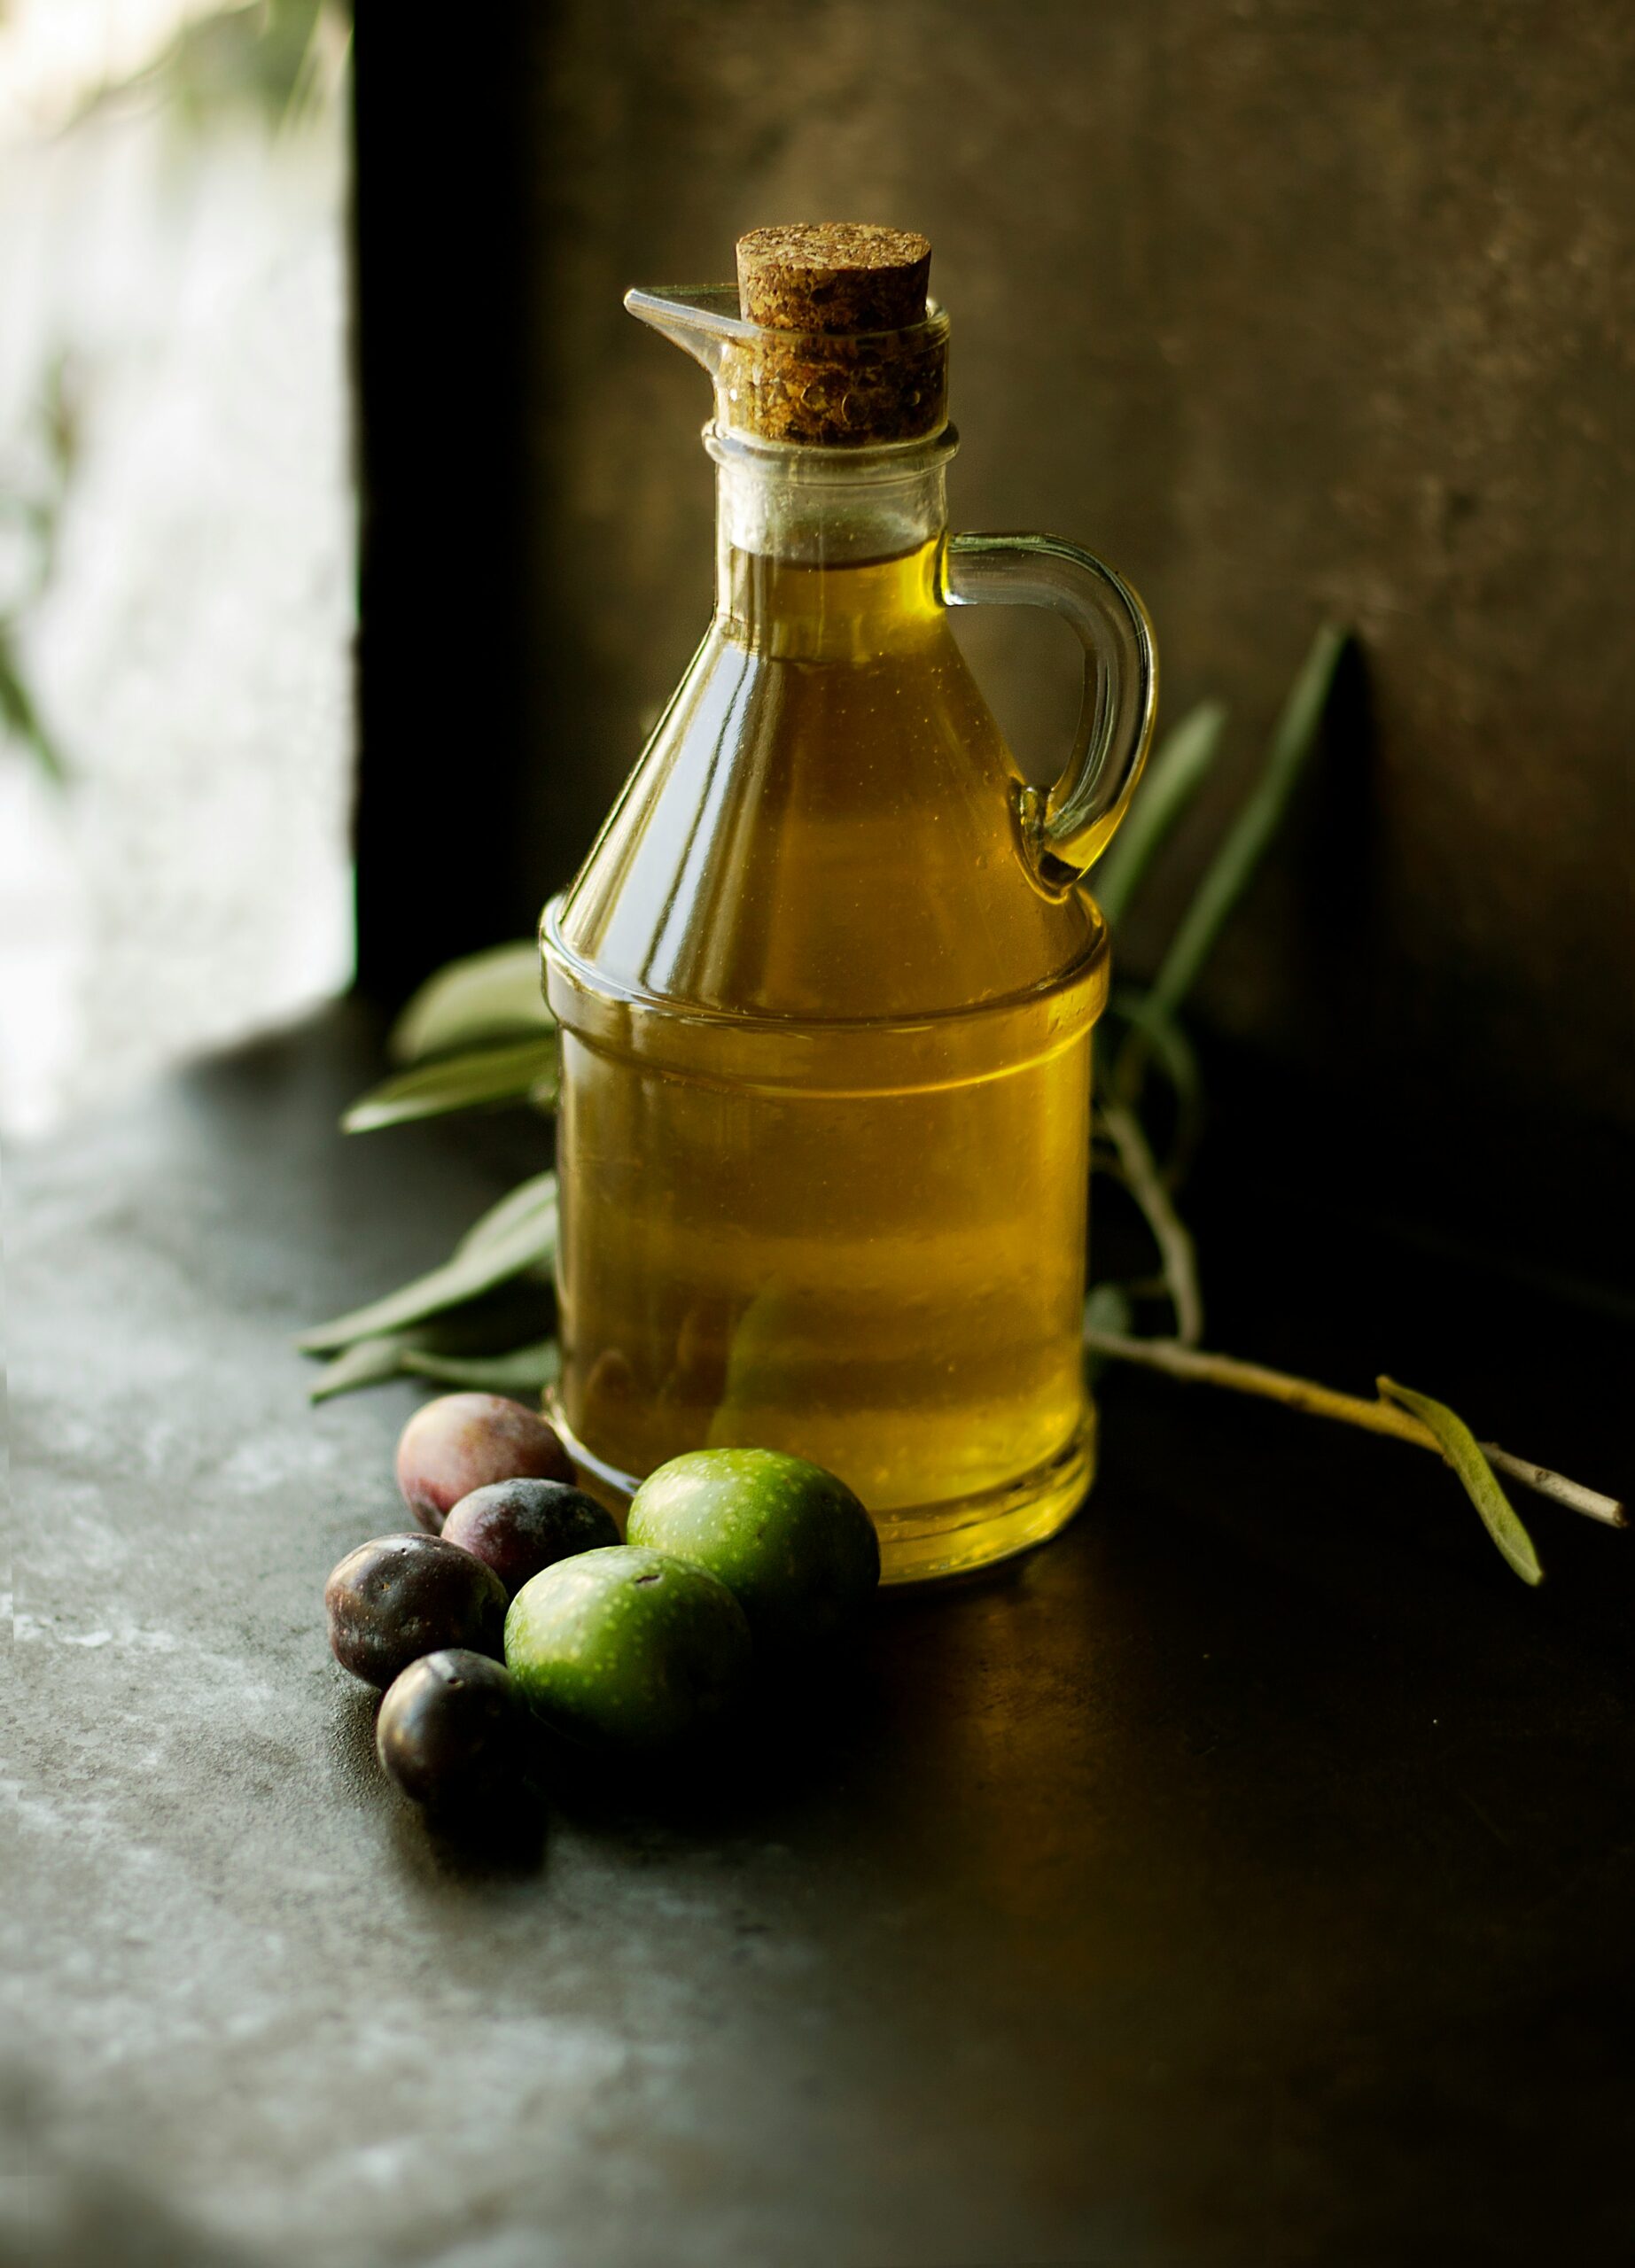 A bottle of olive oil with olives in front of it.